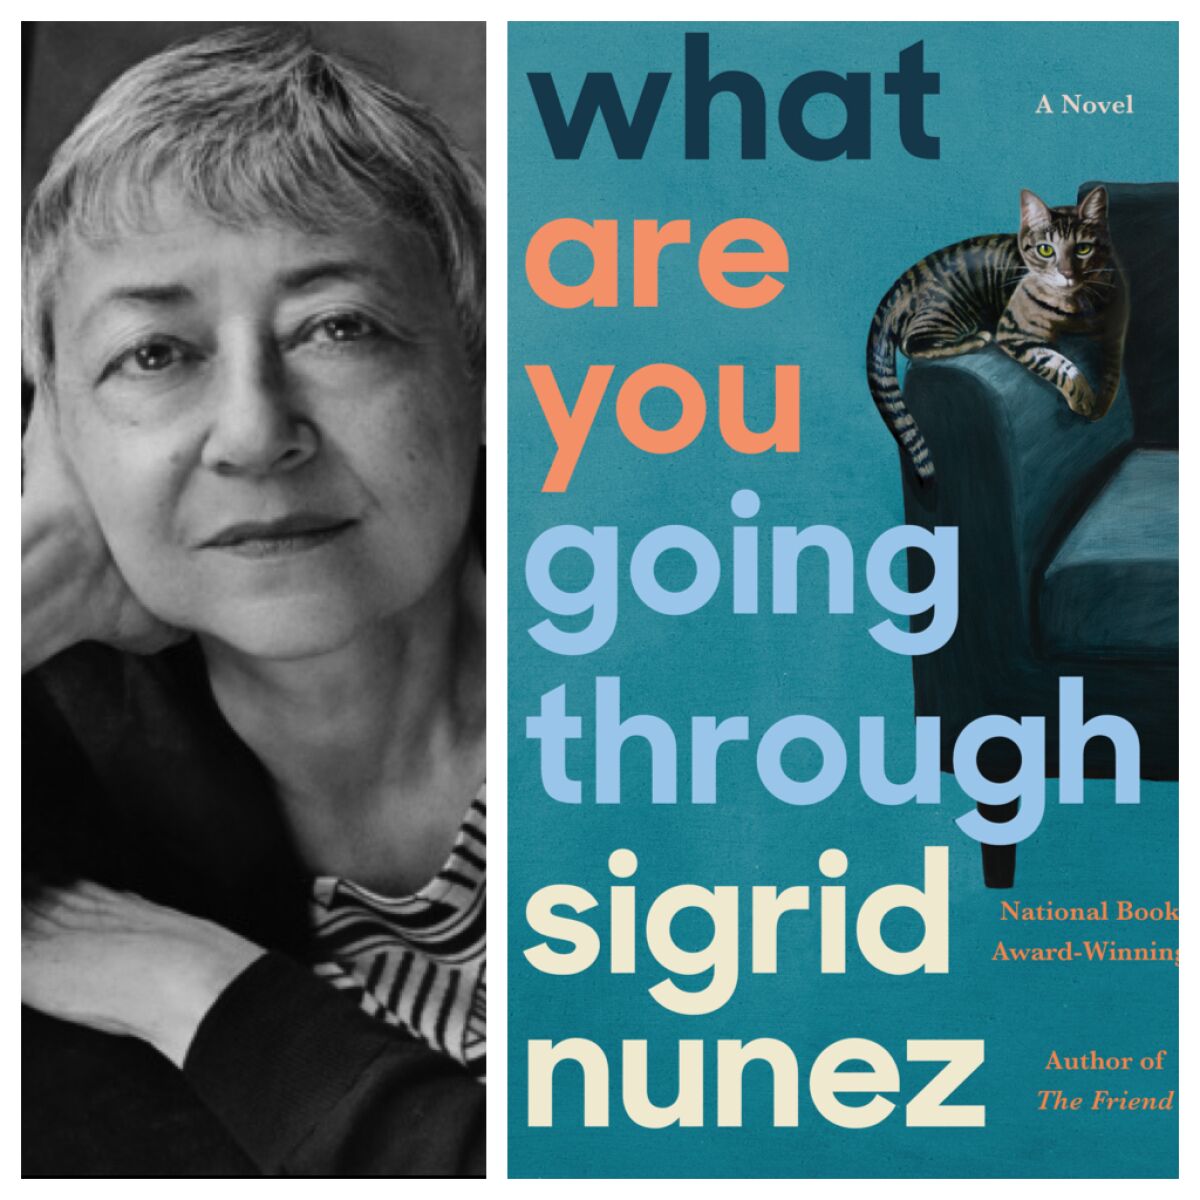 The author Sigrid Nunez and her book "What Are You Going Through."